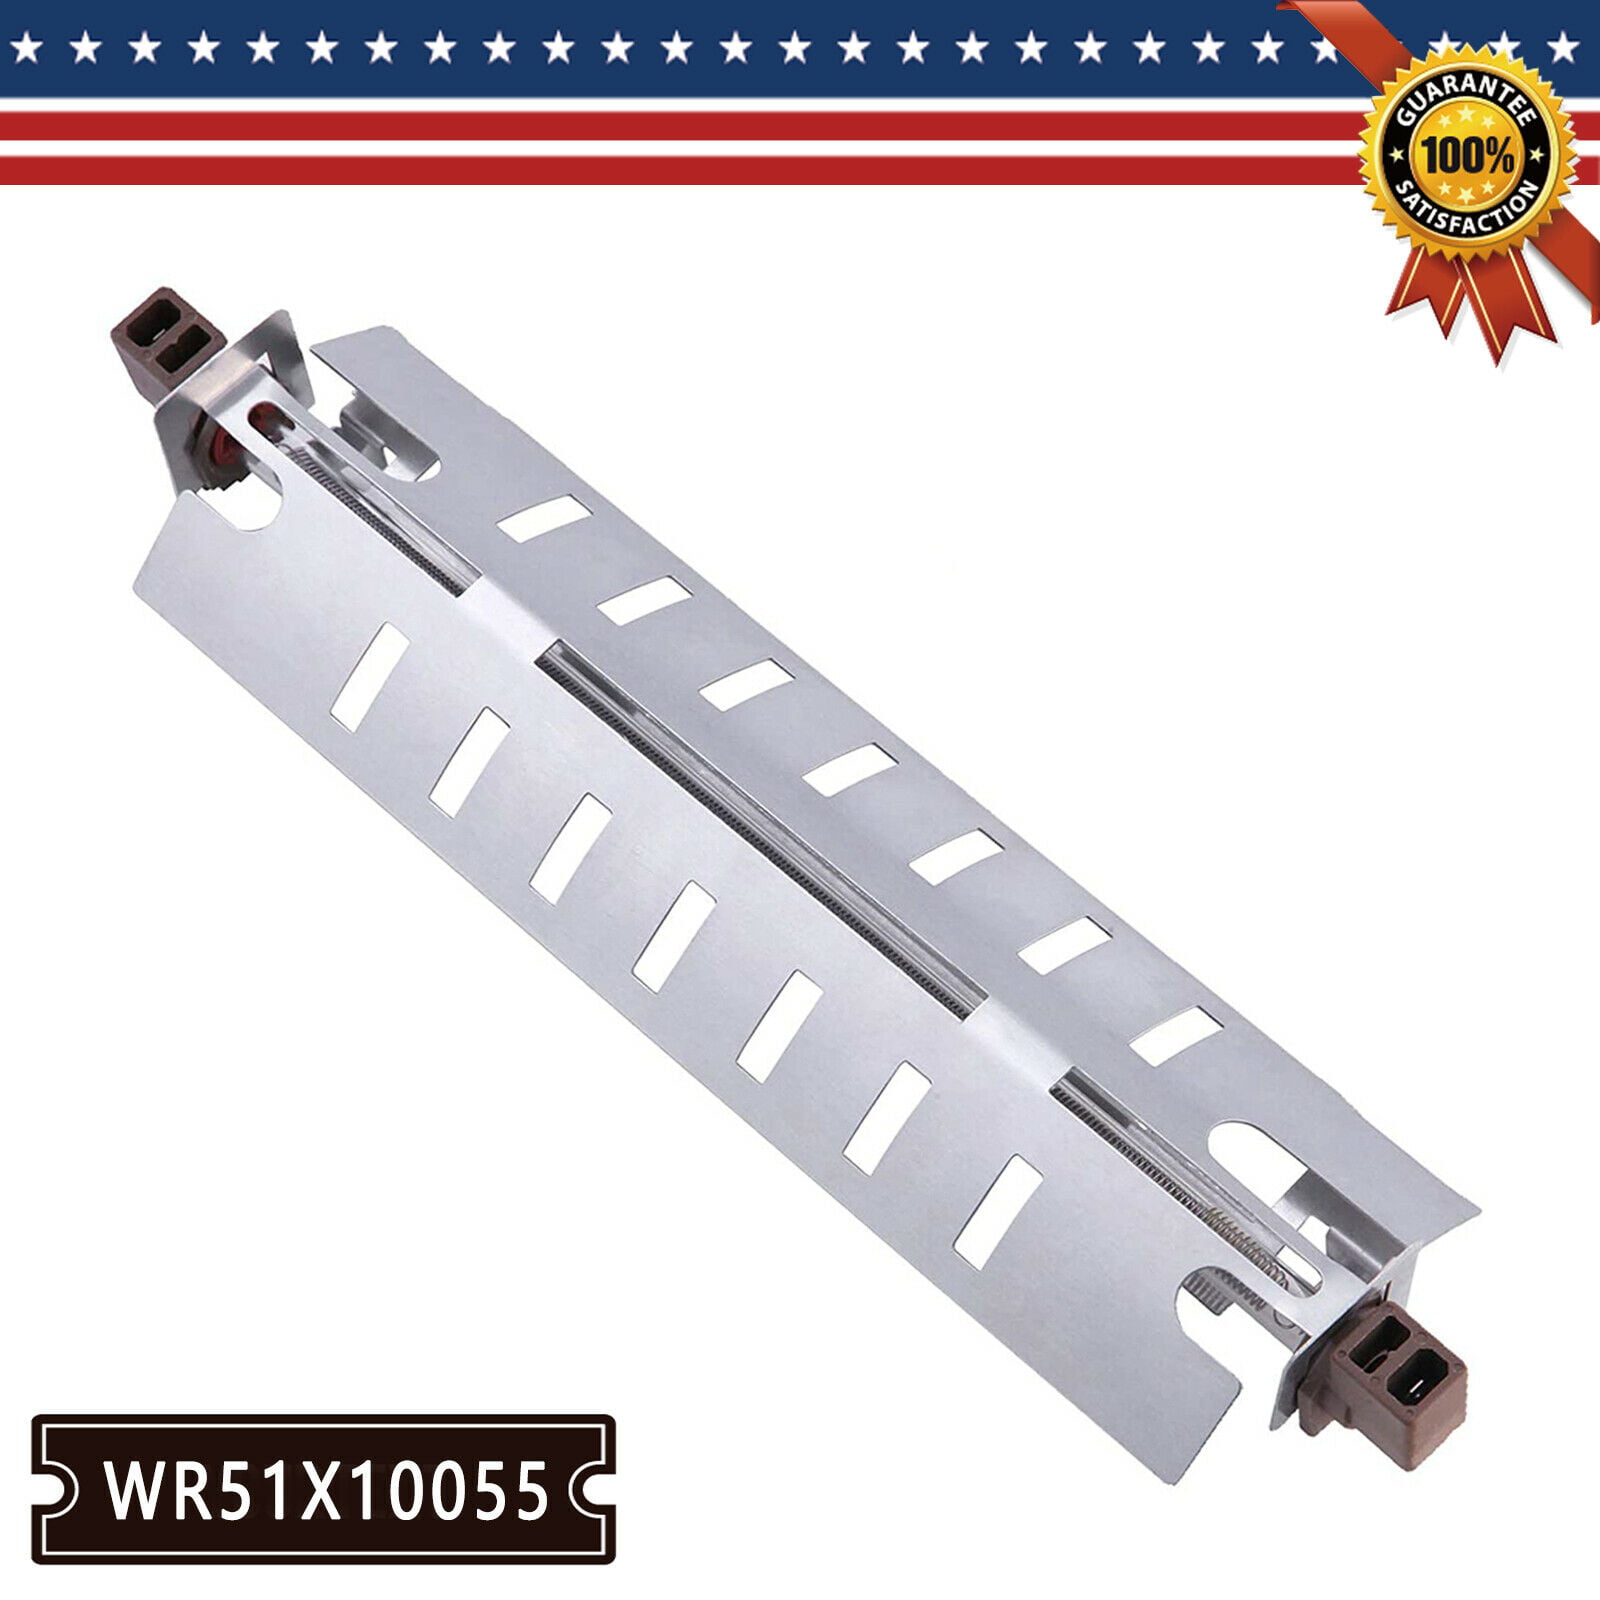 WR51X10055 Refrigerator Defrost Heater WR51X10030 AP3183311 Replacement for  GE - Walmart.com